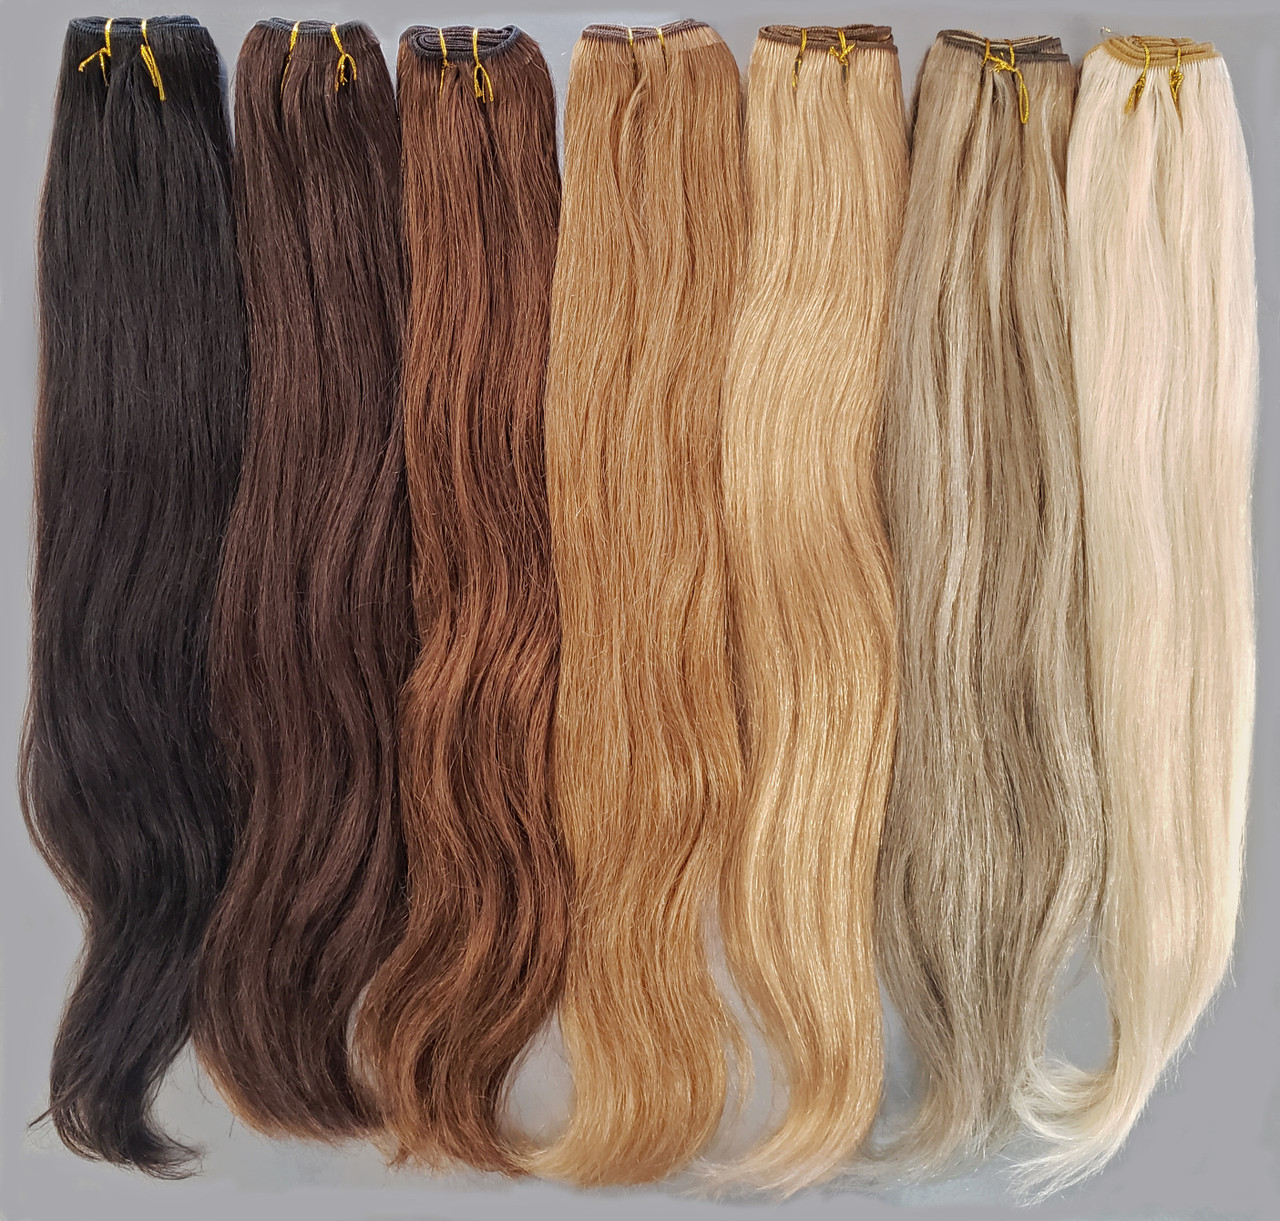 Indian Weft Hair Extensions